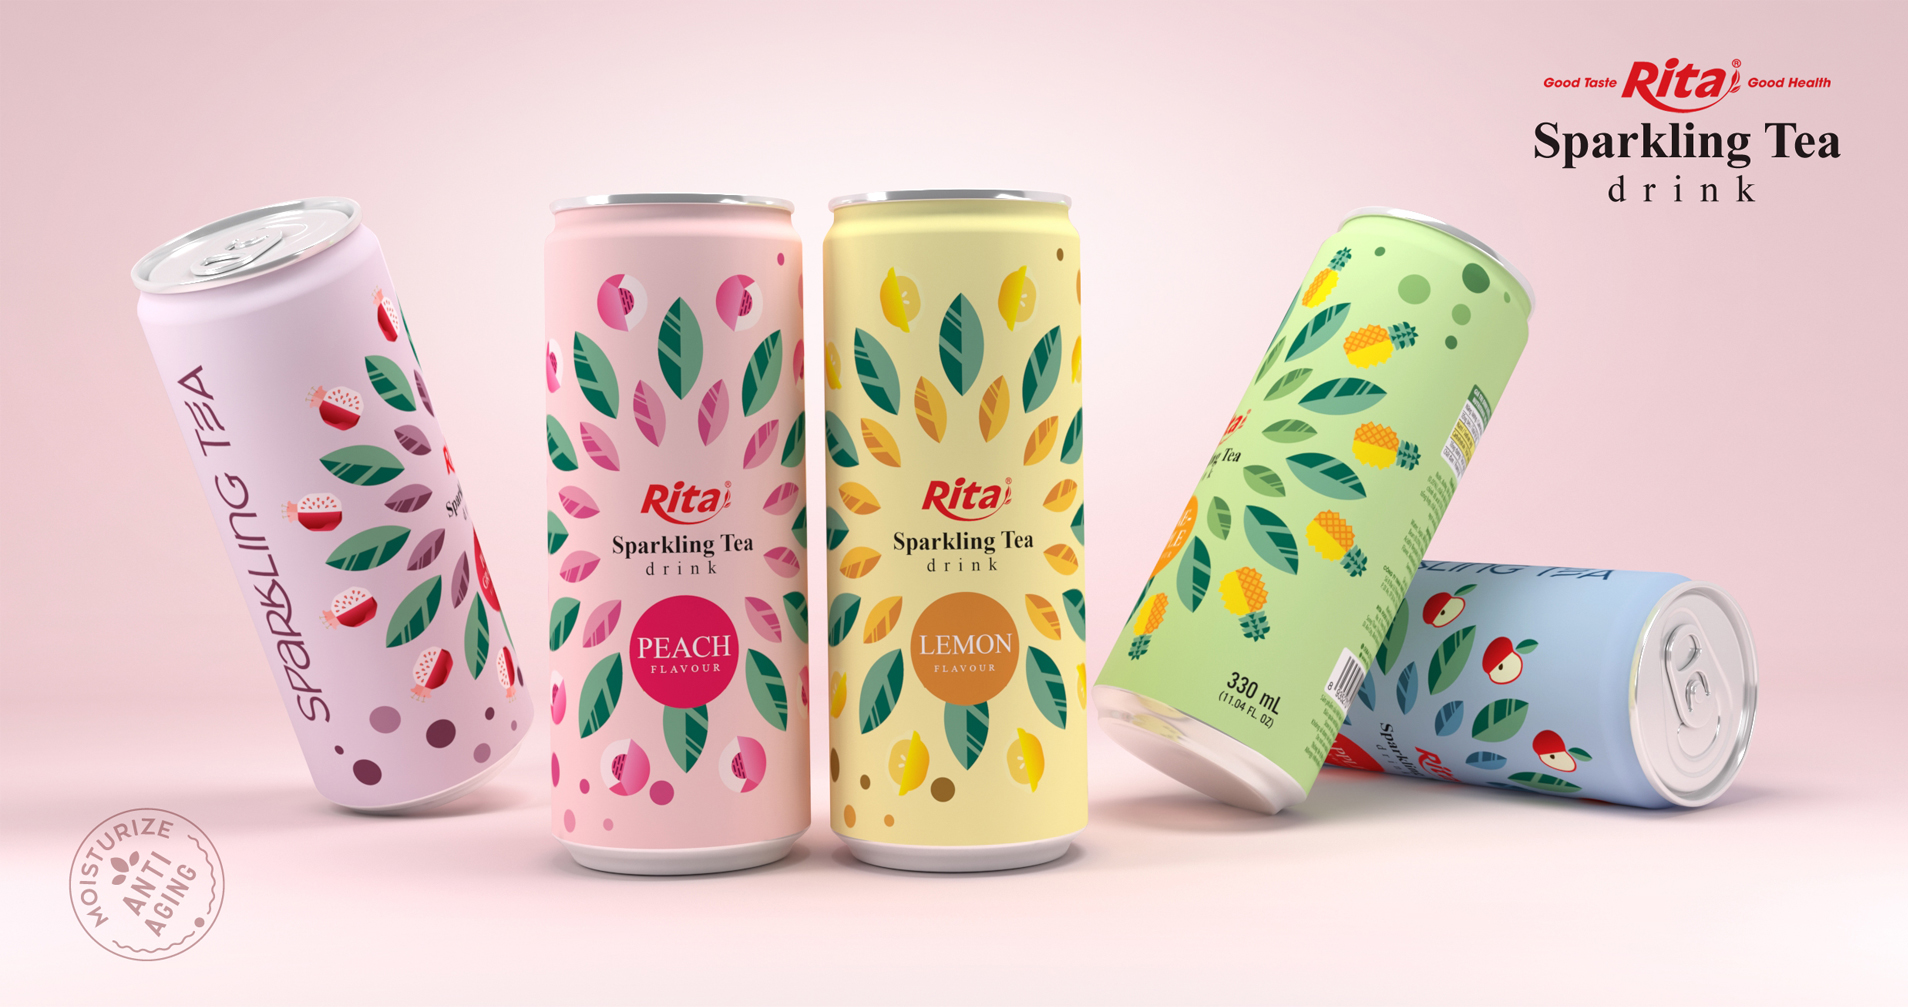 Sparkling Tea with fruit flavour from RITA Beverage manufacturer